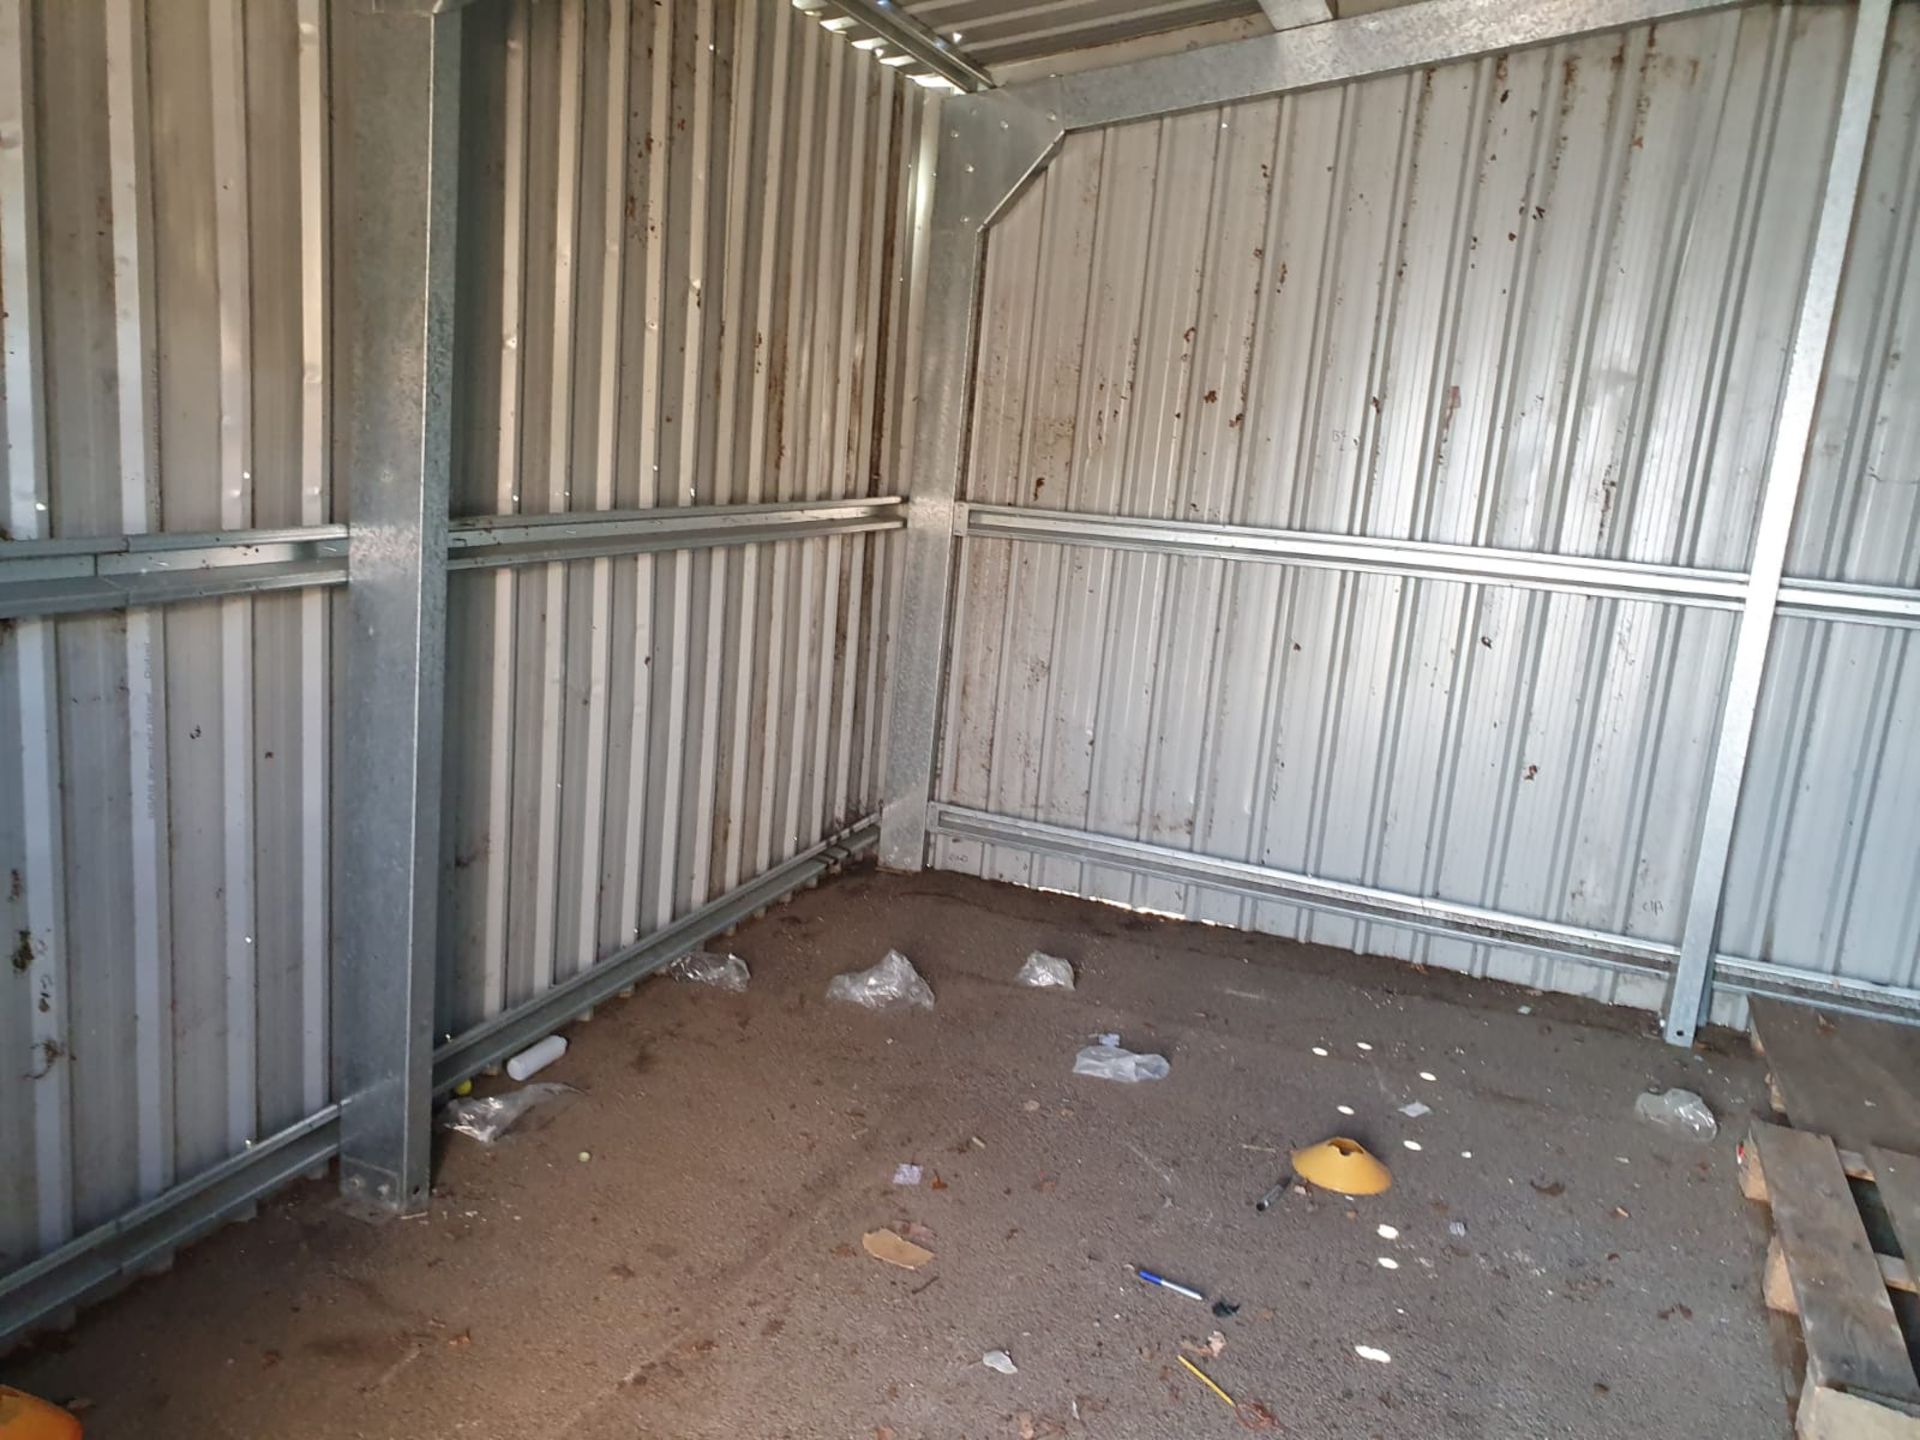 1 x Large Steel Storage Shed Container With Four Wooden Folding Doors - Approx Dimensions 5M x 5M - Image 16 of 16